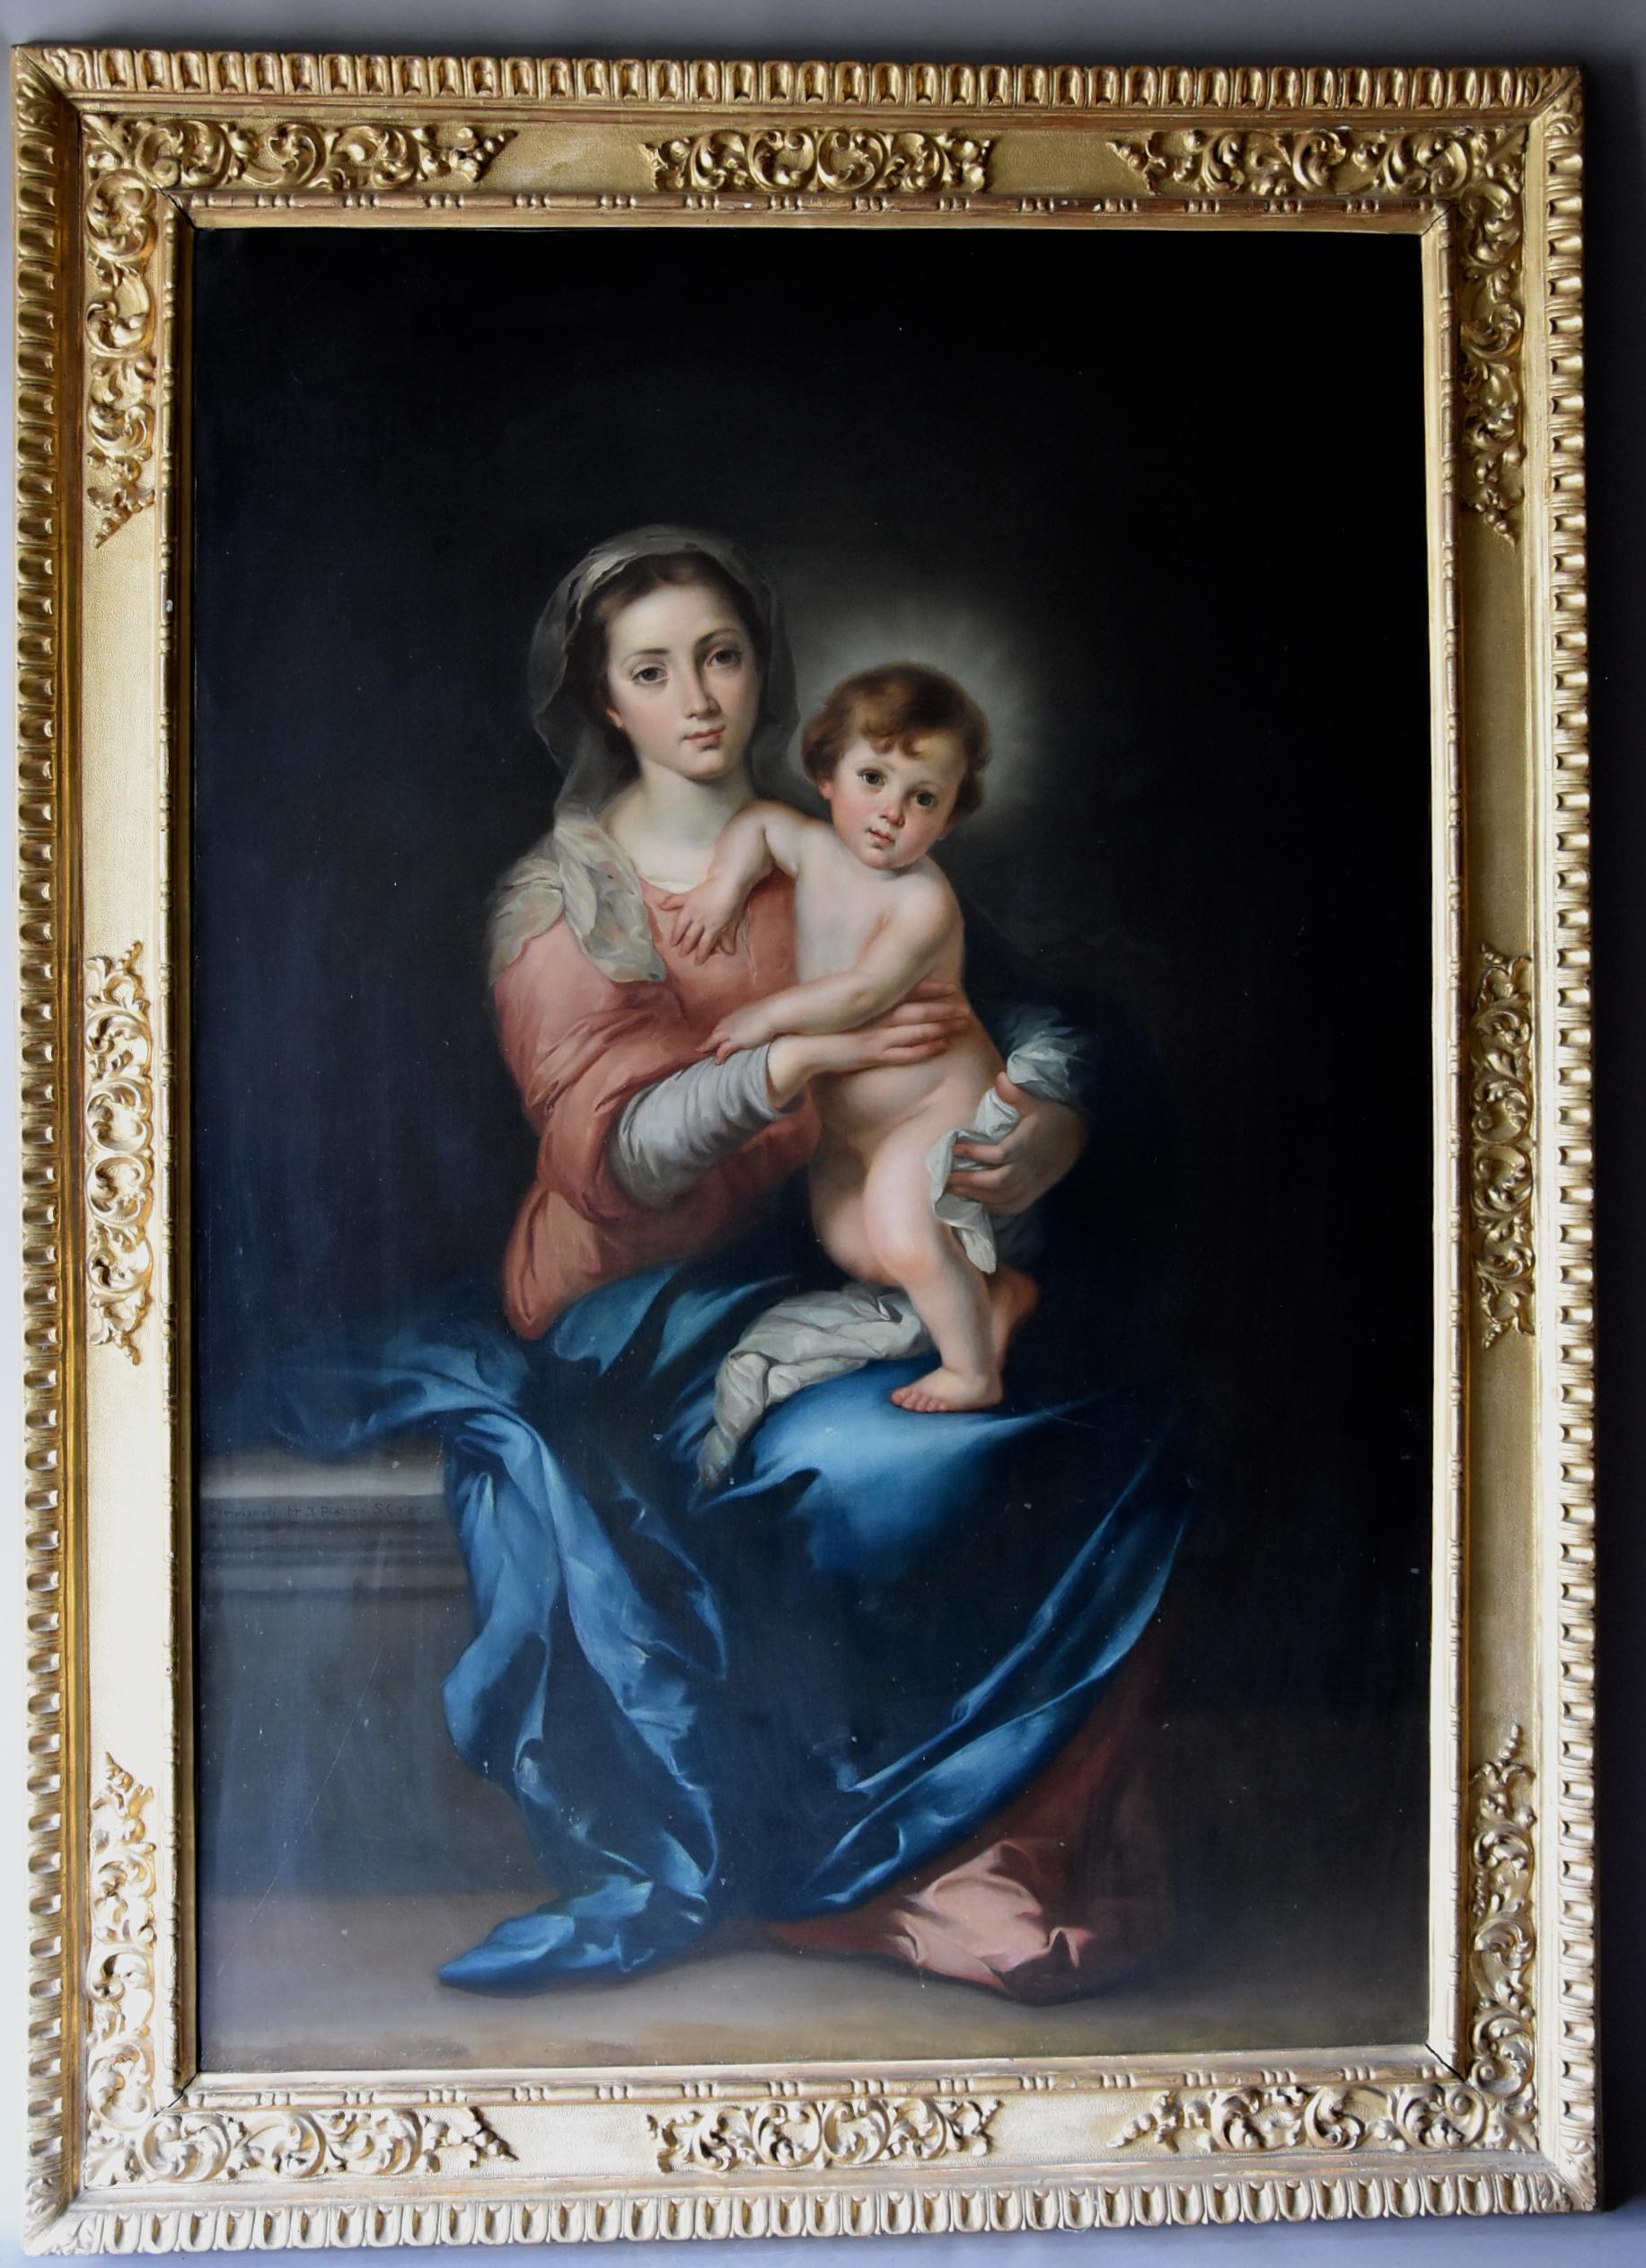 A large finely executed late 19th century (circa 1872) oil painting of 'The Madonna & Child' by Luigi Pompignoli, after the original by Bartolome Esteban Murillo (1618-1682). 

The painting depicts the seated Madonna holding her child, the canvas